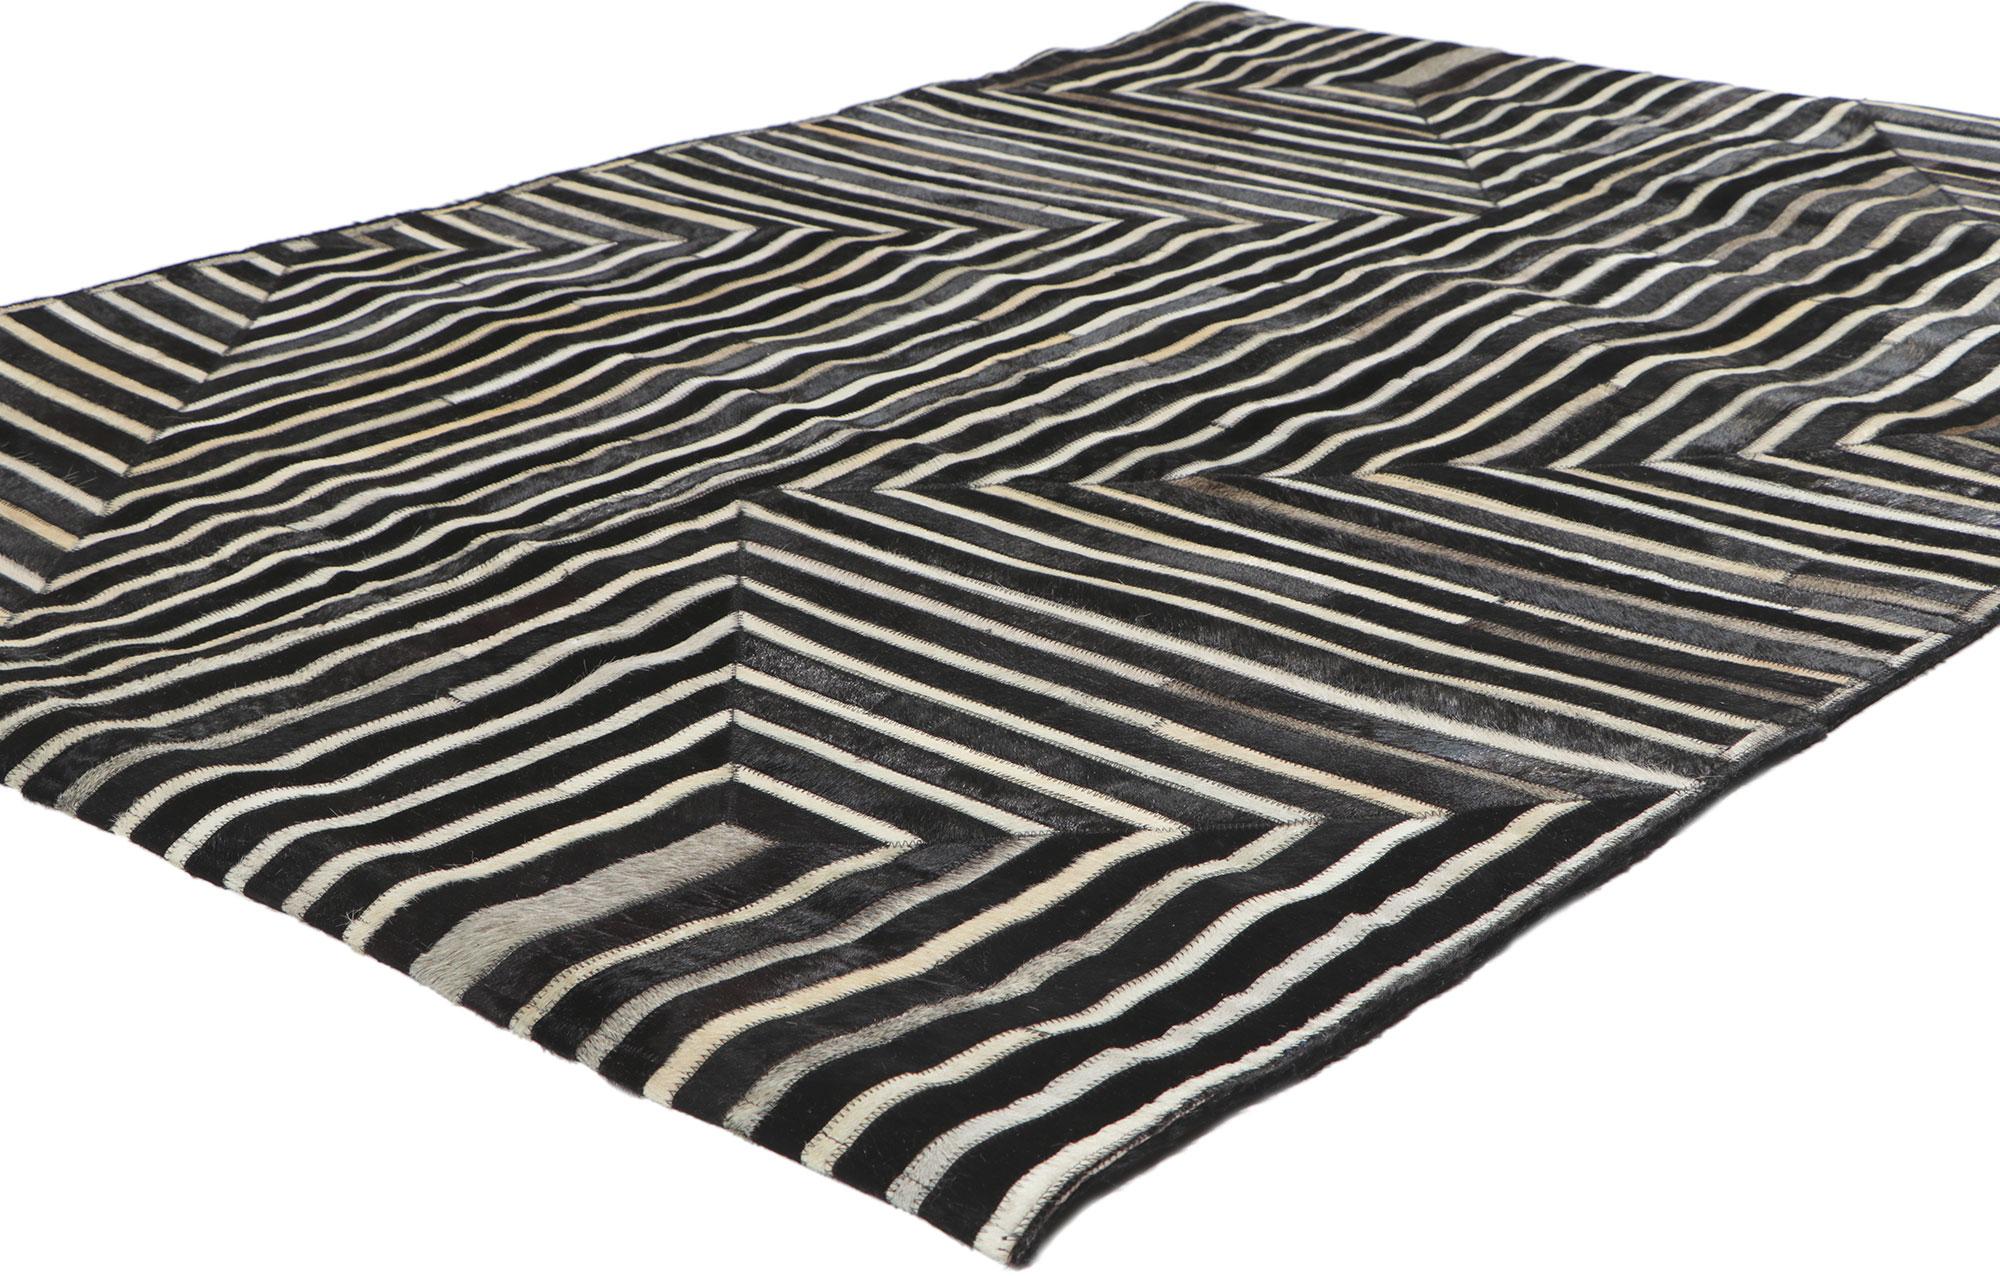 30909 Contemporary Patchwork Cowhide Rug with Modern Style,  04'02 x 05'11. Call the wild indoors and bring a sense of adventure home with this handcrafted cowhide rug. Showcasing a modern design, incredible detail and texture, this leather cowhide